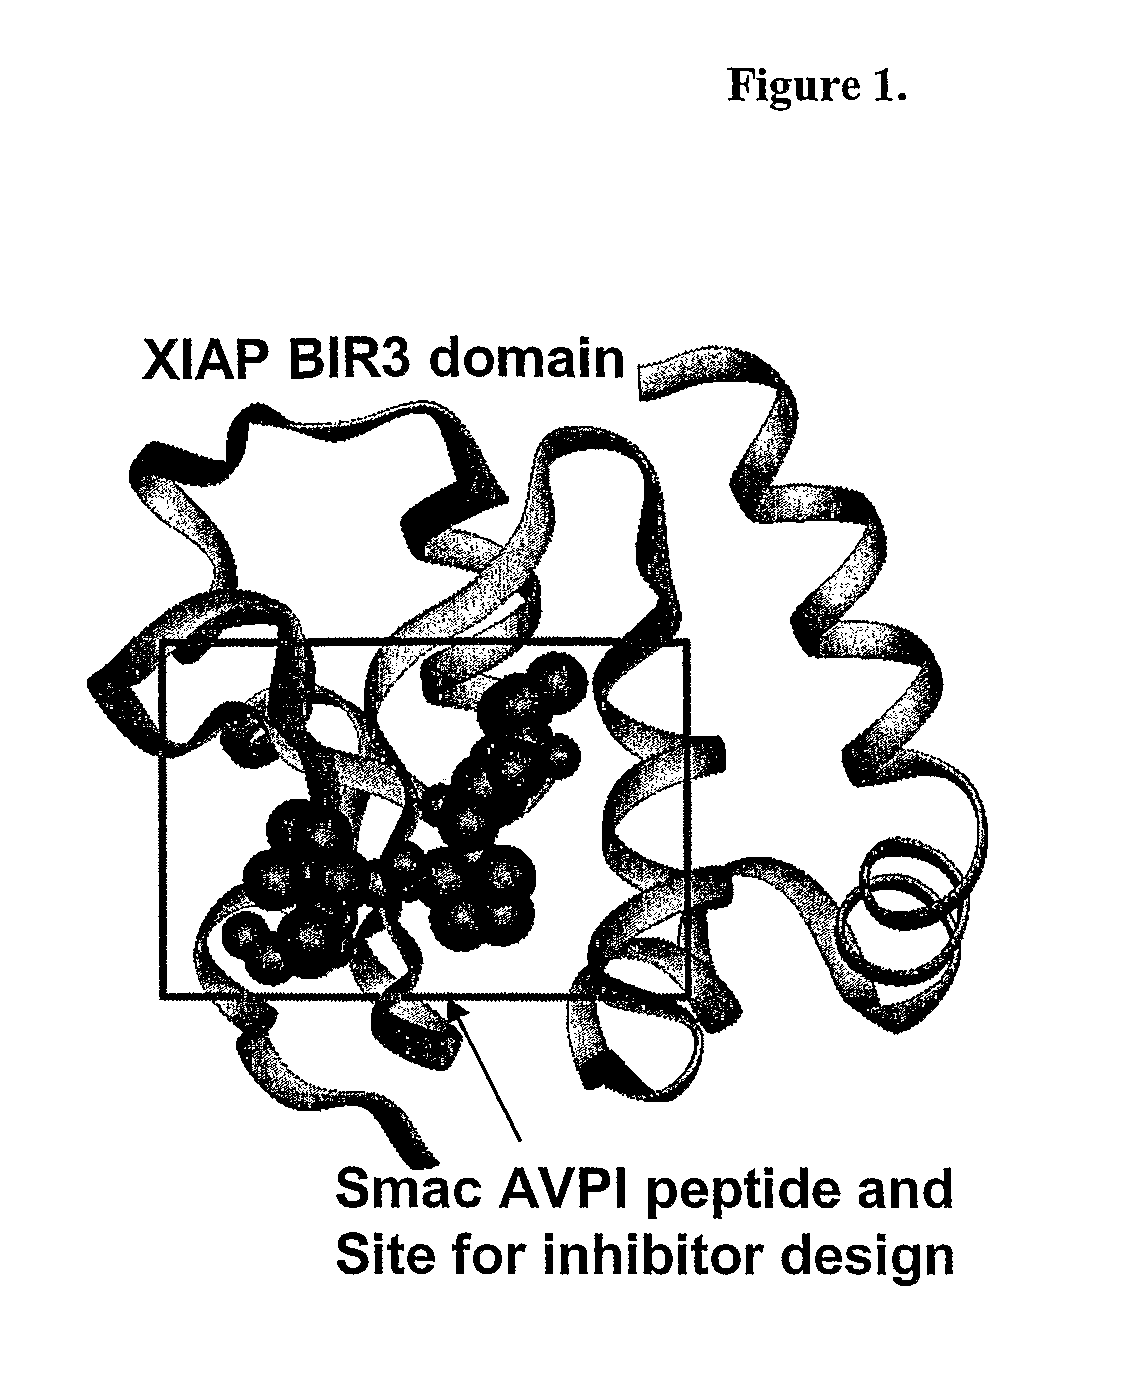 Small molecule antagonists of XIAP family proteins